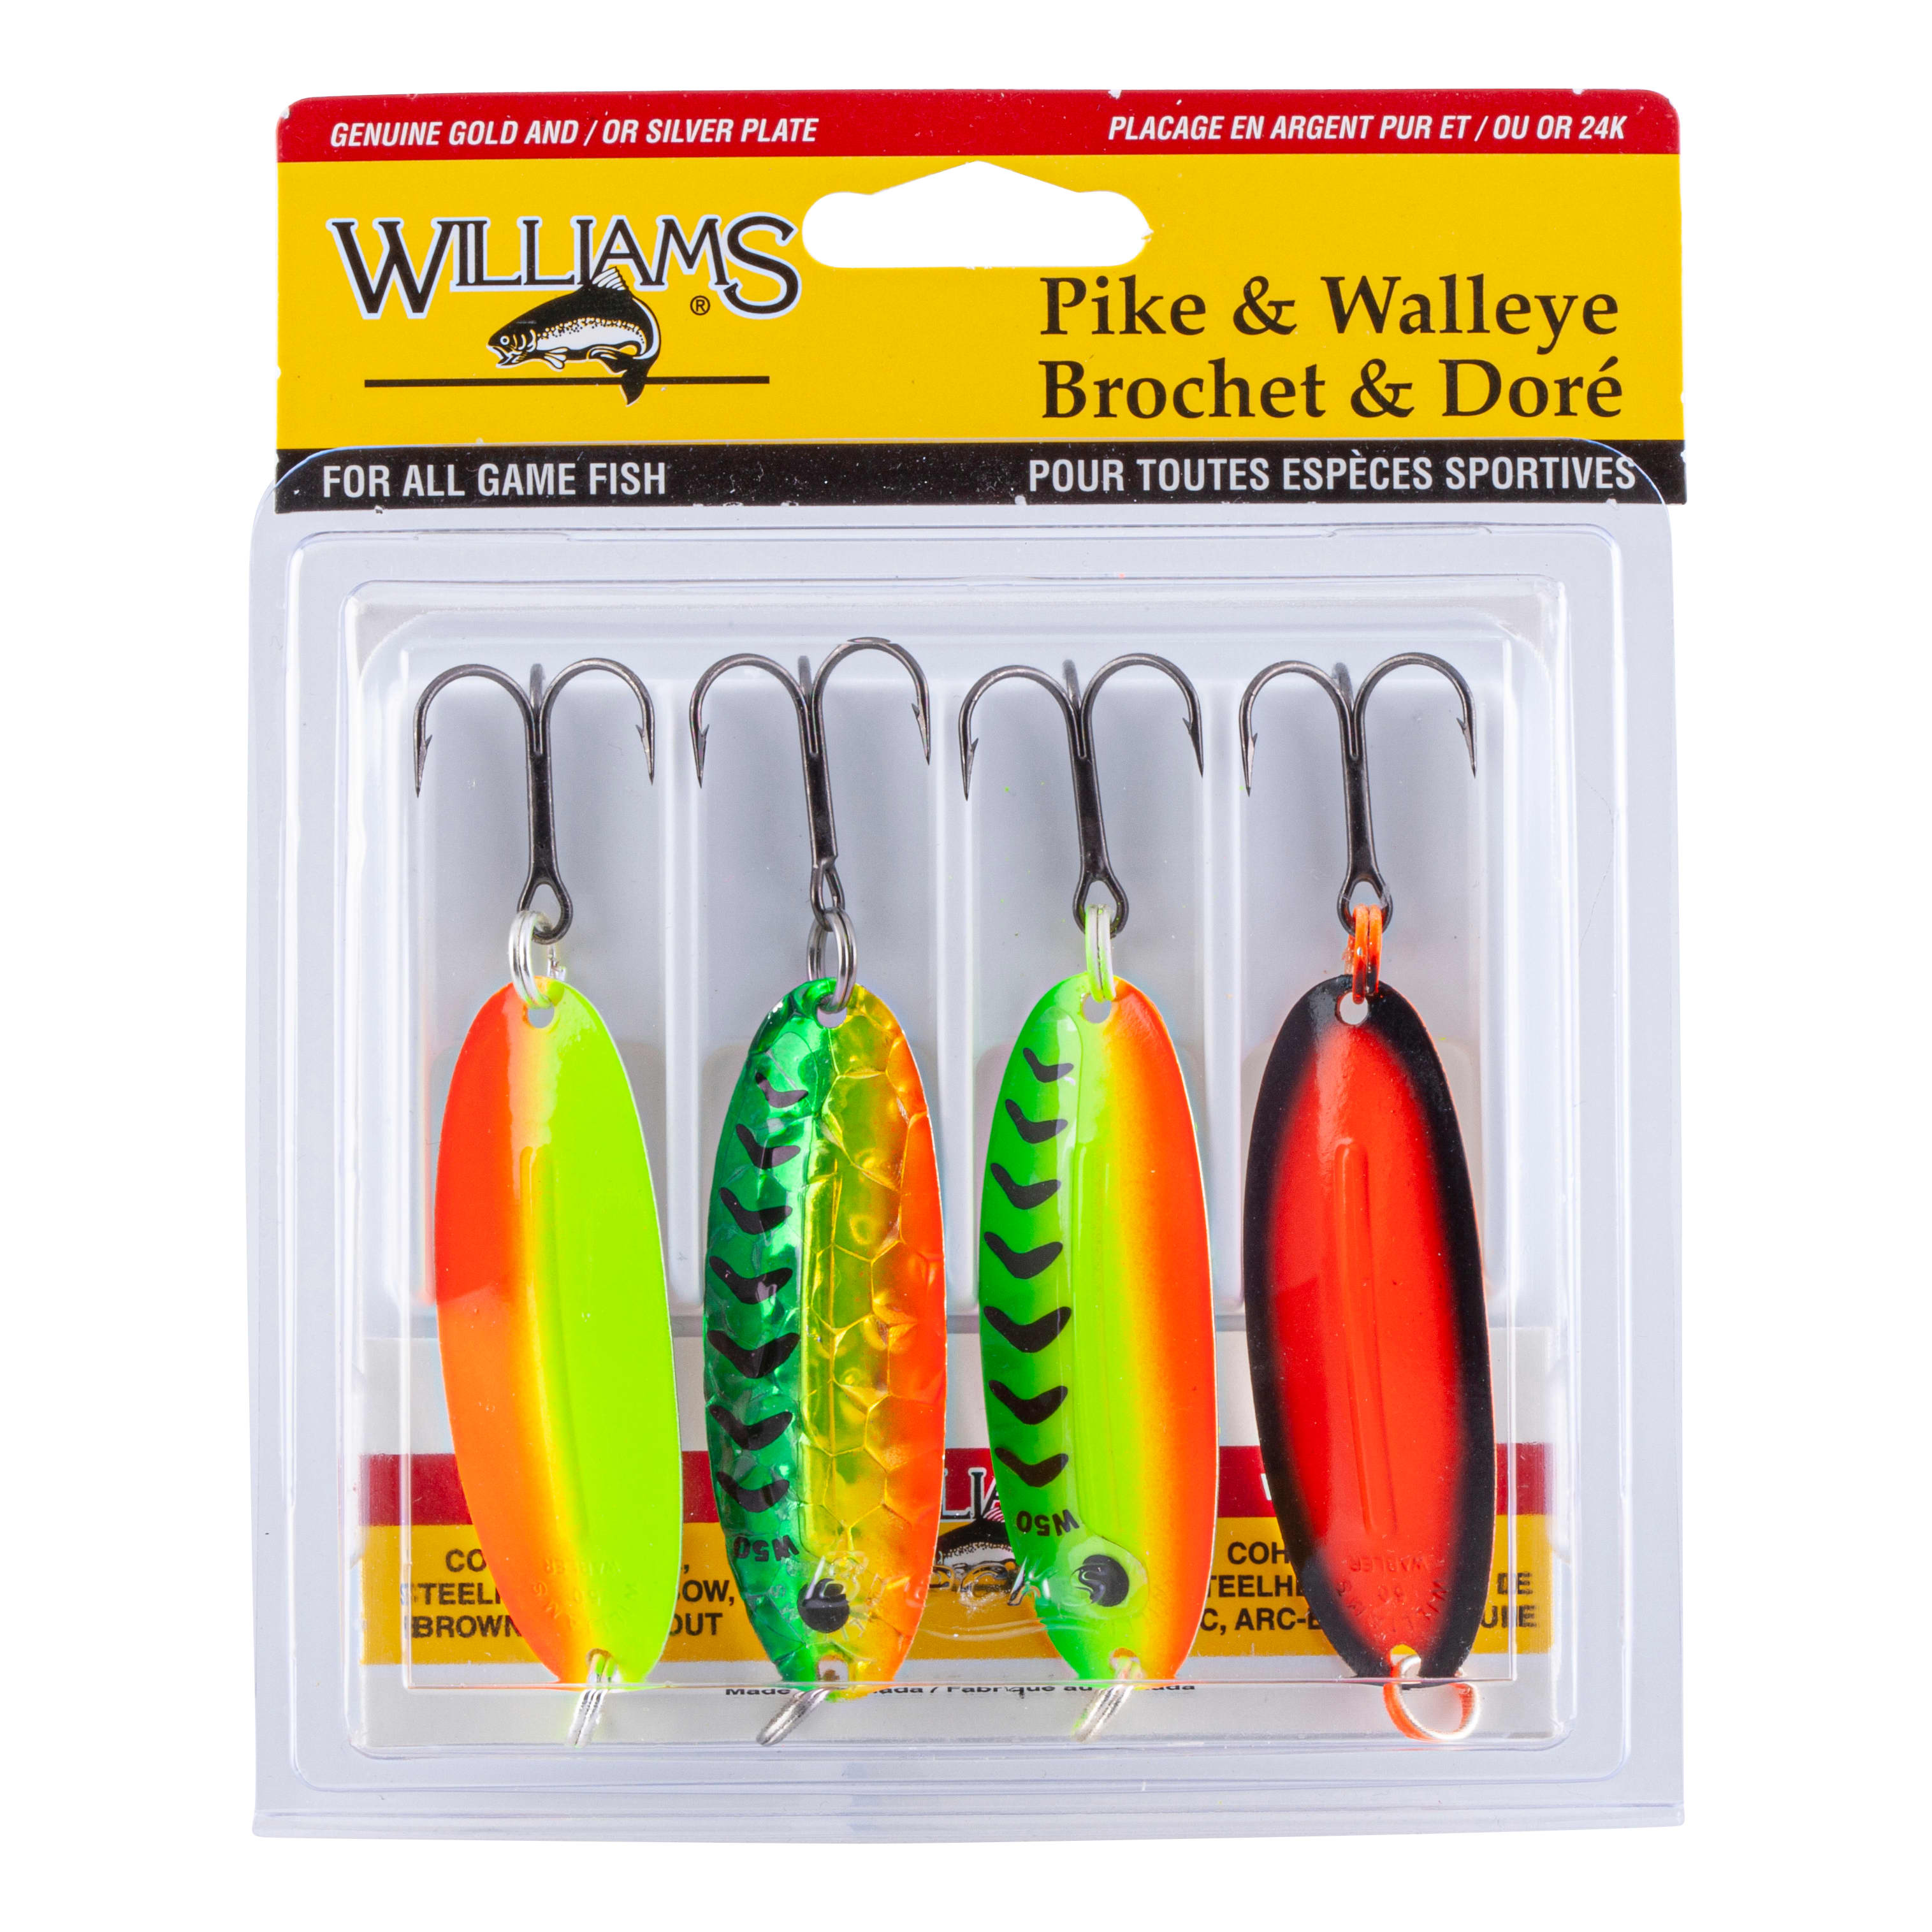 Fishing Lures for sale in Pike, New Hampshire